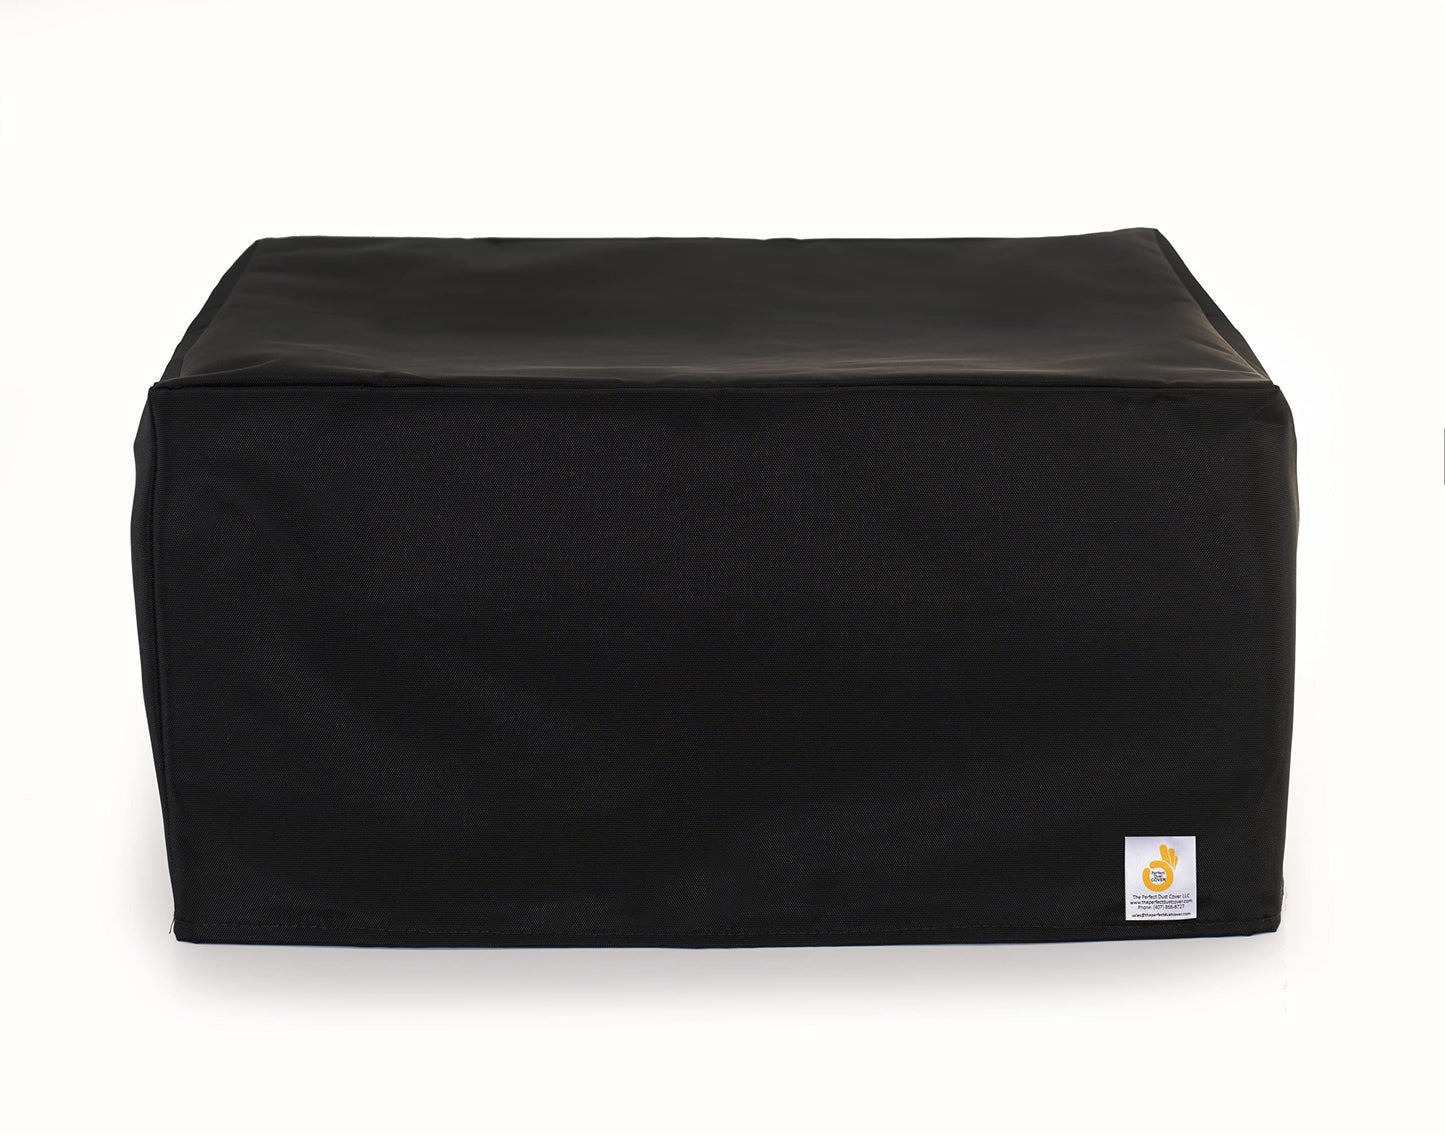 The Perfect Dust Cover, Black Nylon Cover Compatible with Canon Pixma MG6120 Wireless Inkjet All-In-One Printer, Anti-Static, Double Stitched and Waterproof Dust Cover by The Perfect Dust Cover LLC